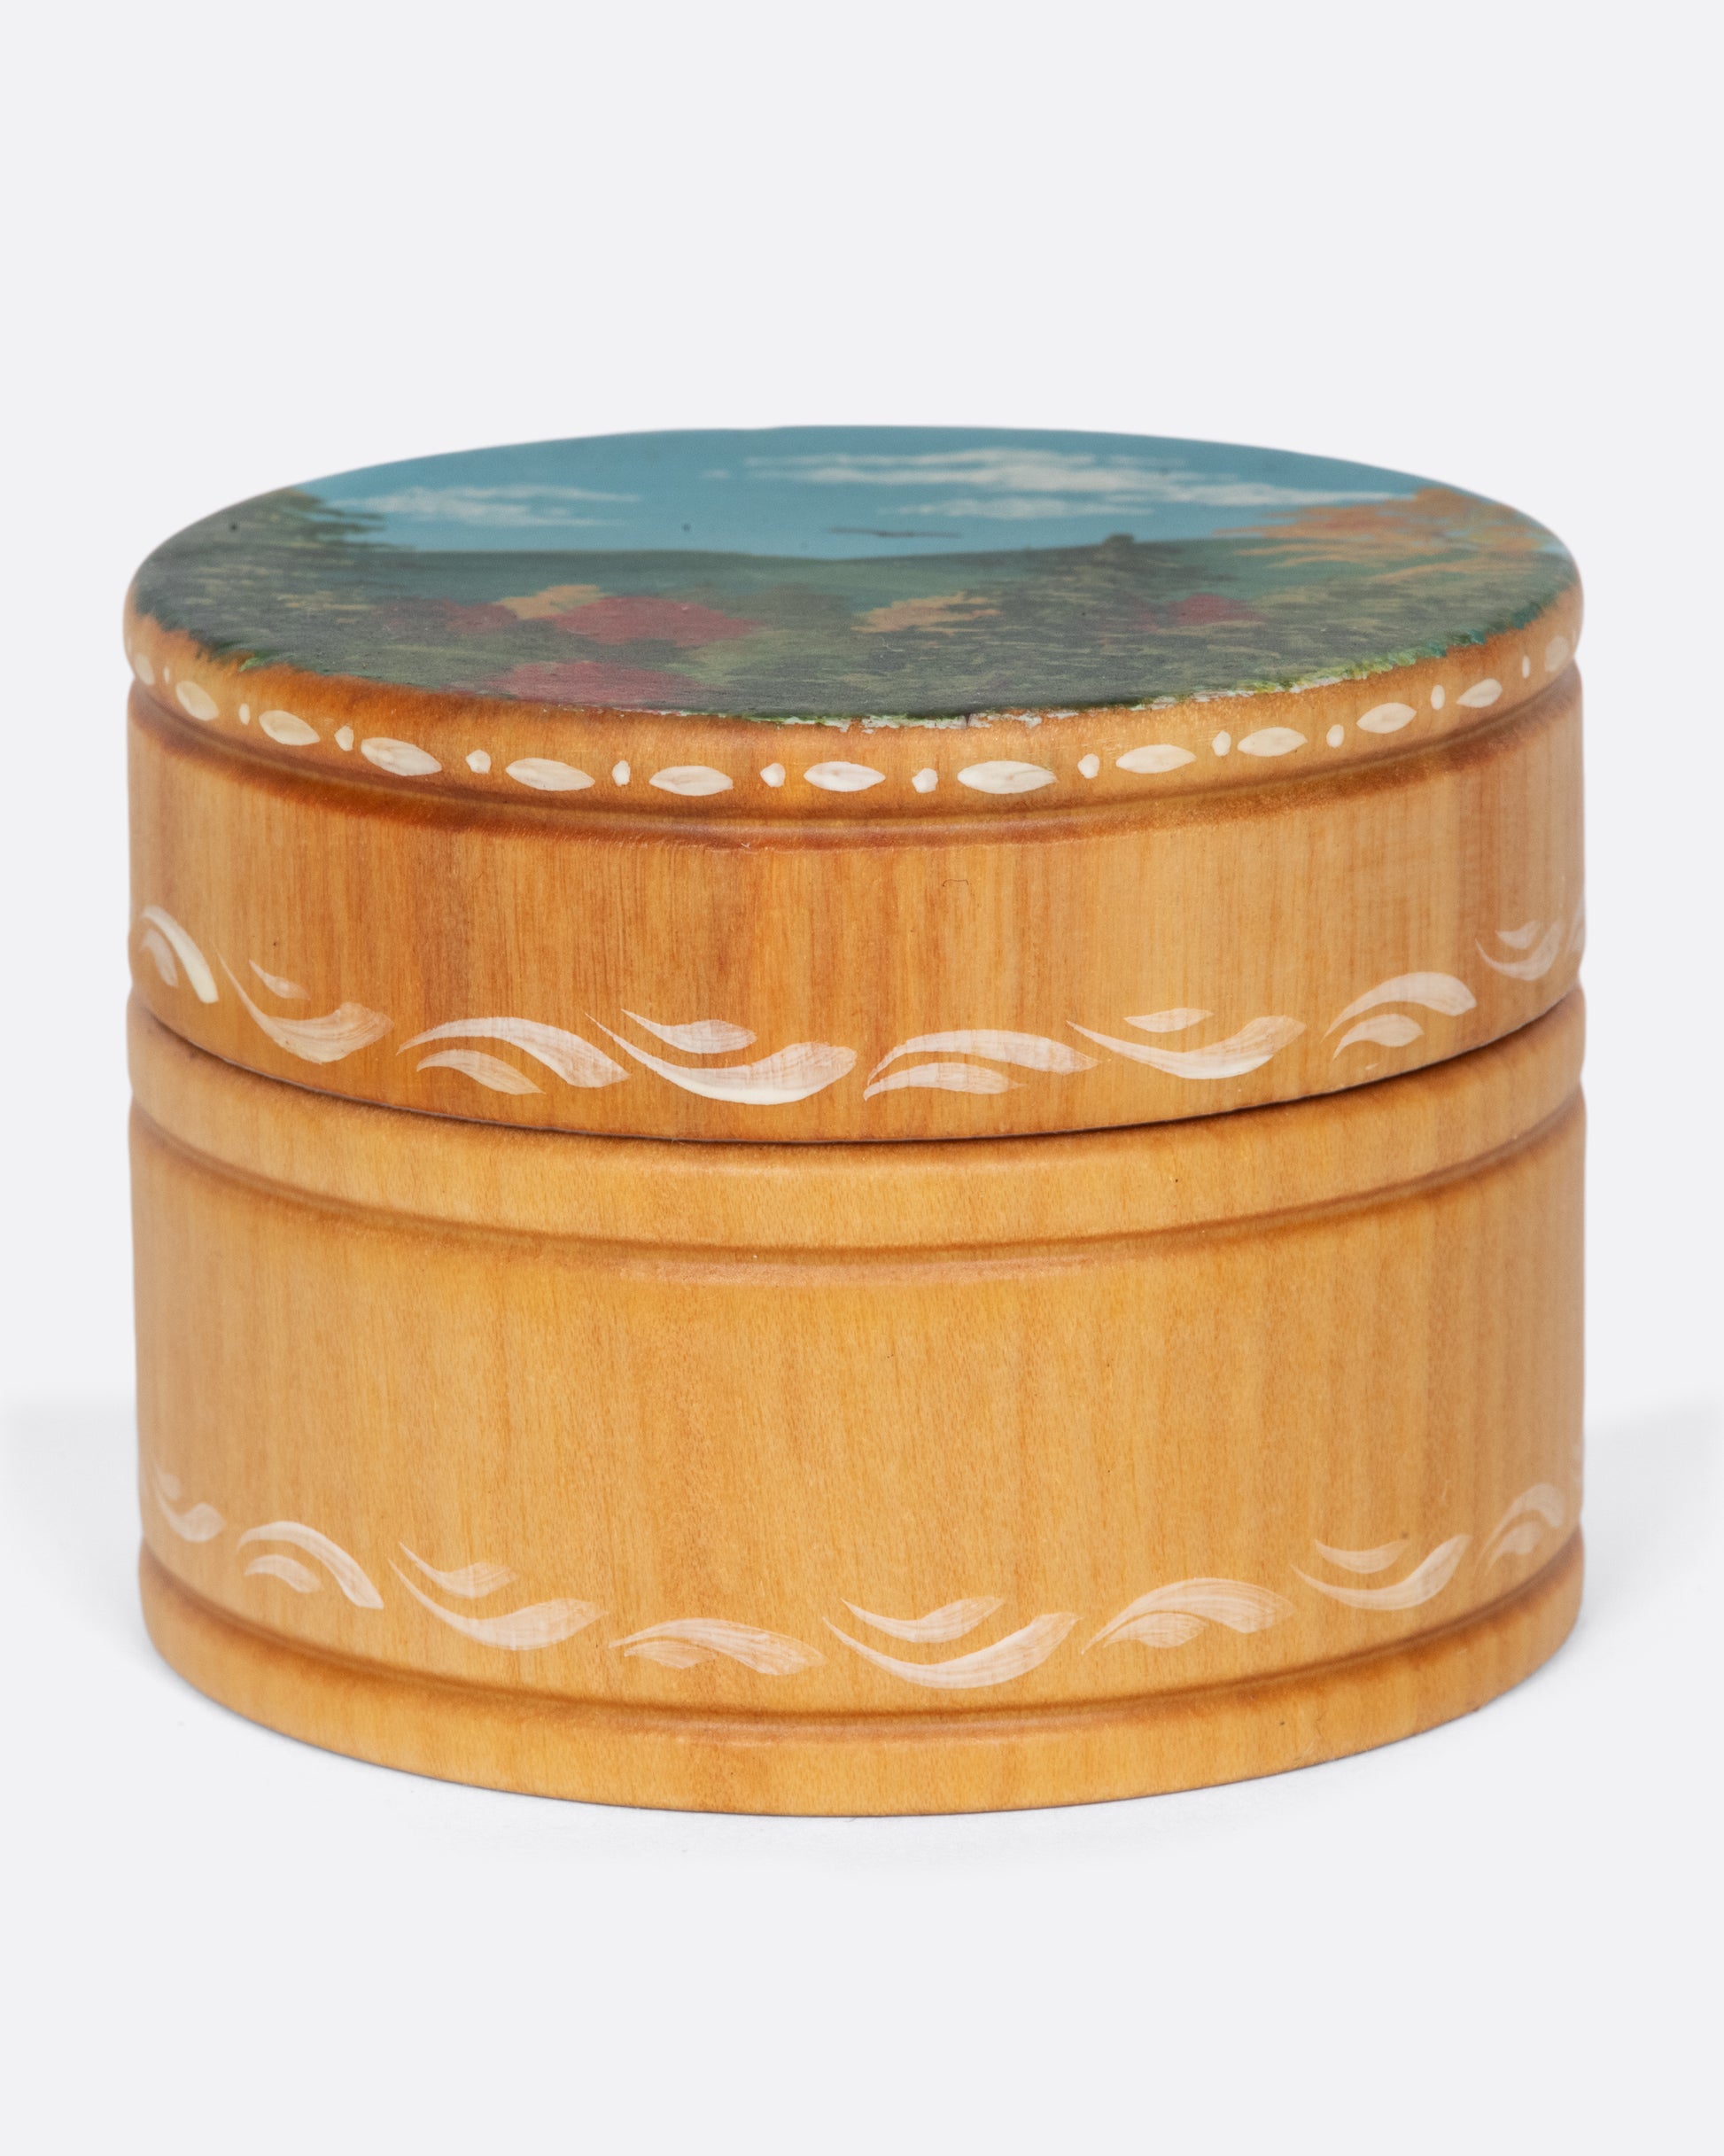 A vintage round wooden box with a beautiful landscape on the lid and painted details around the box.